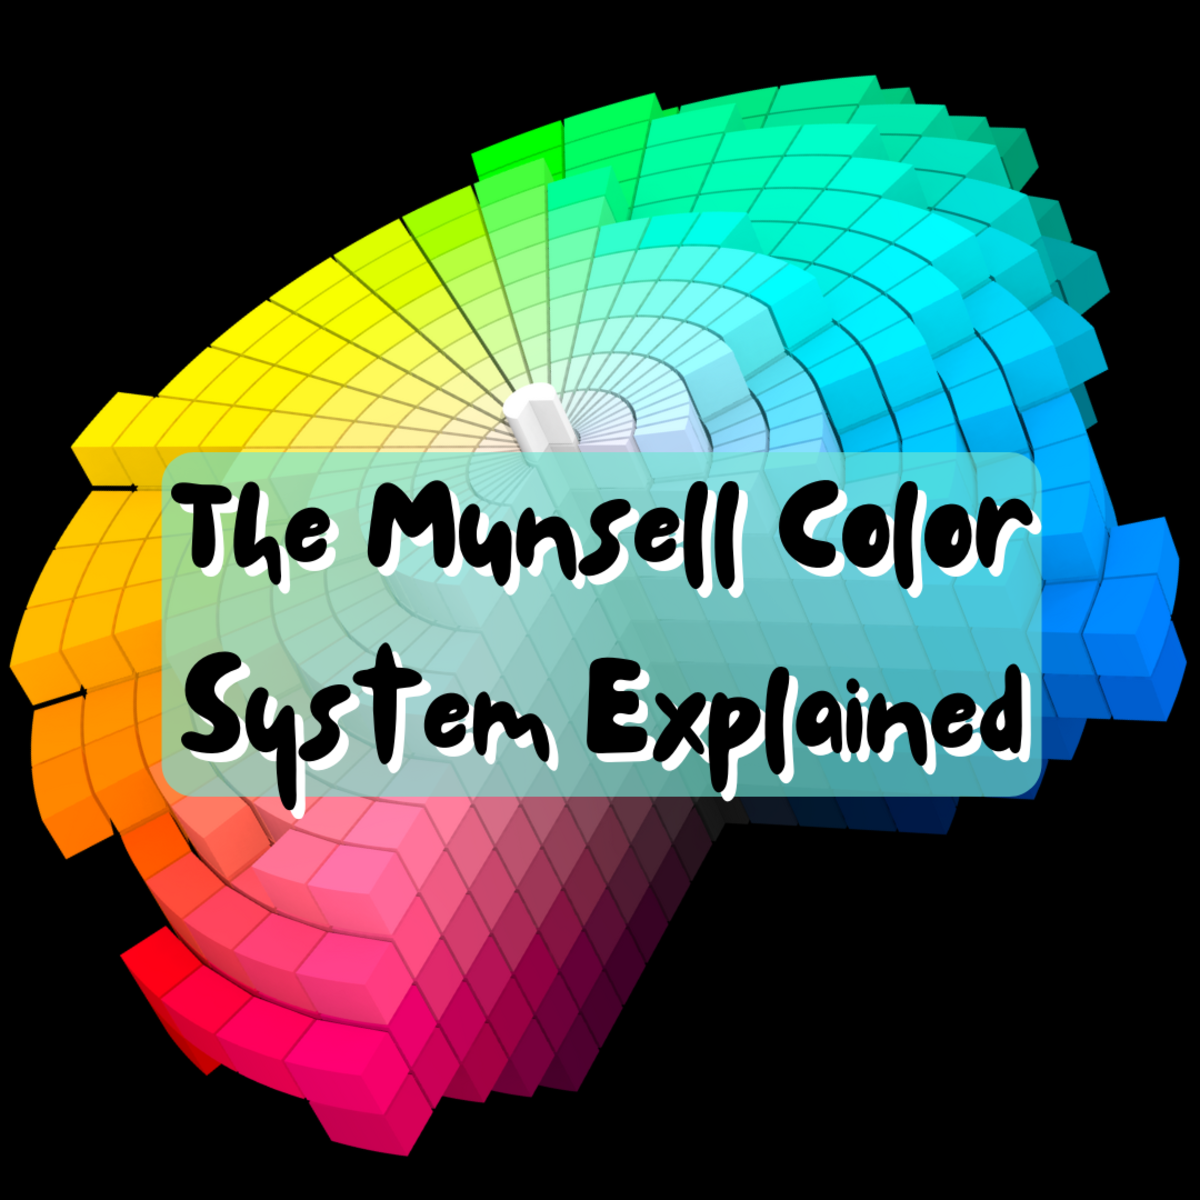 Read on to learn all about the Munsell Color System.